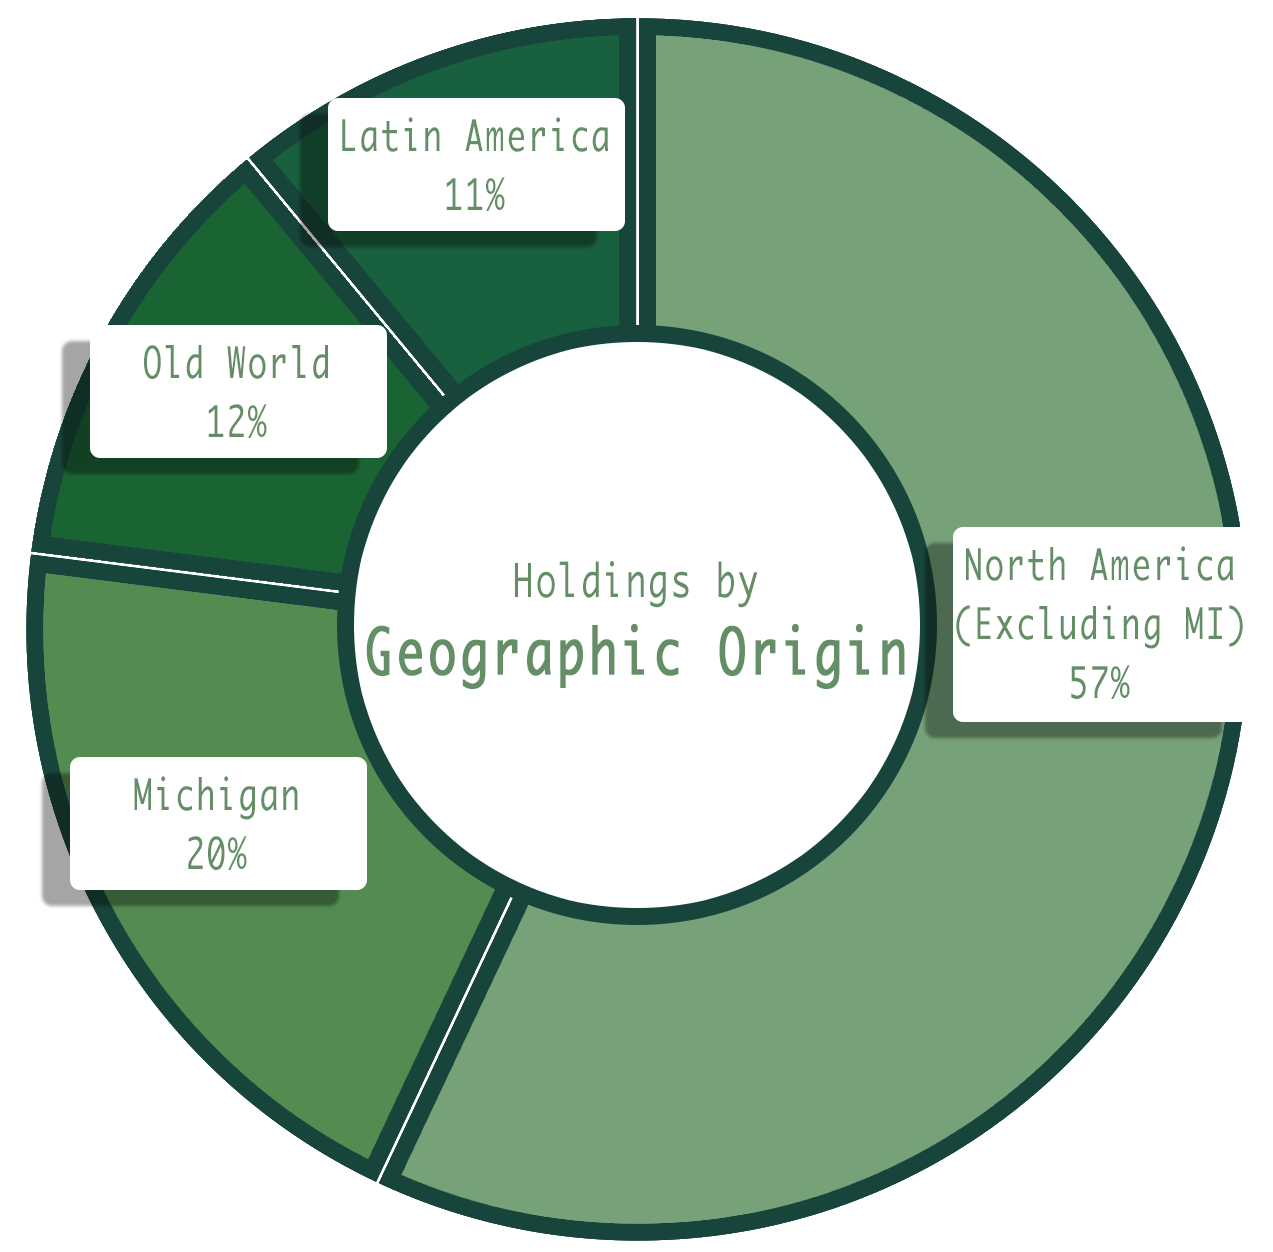 Holdings by Geographic Origin Pie Chart